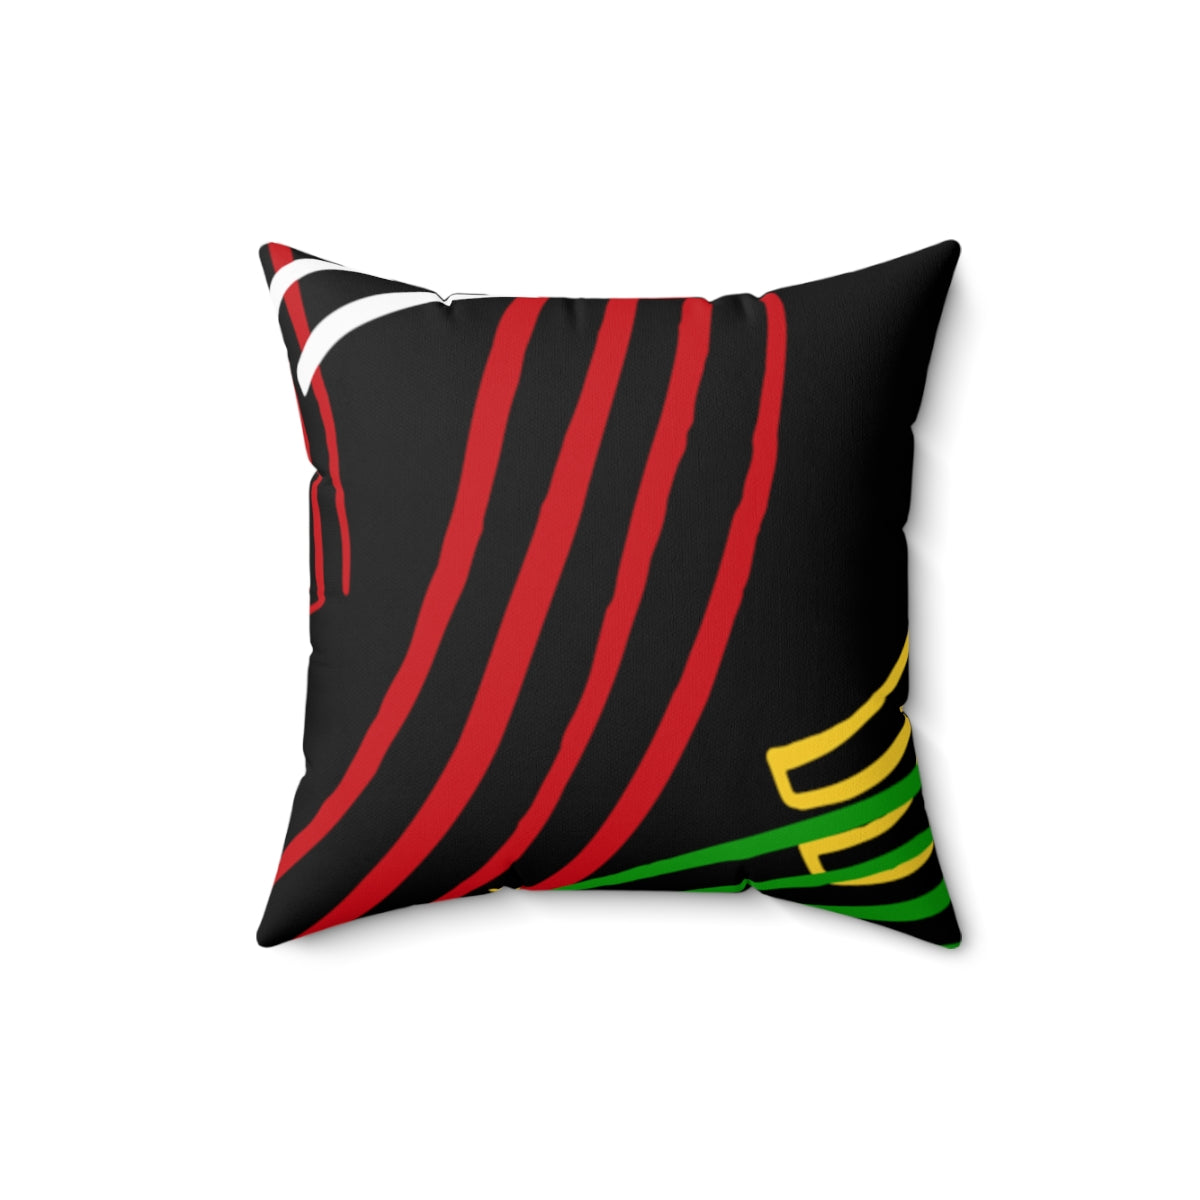 Guyanese Swag Ice Gold Green Abstract Art Spun Polyester Square Pillow.